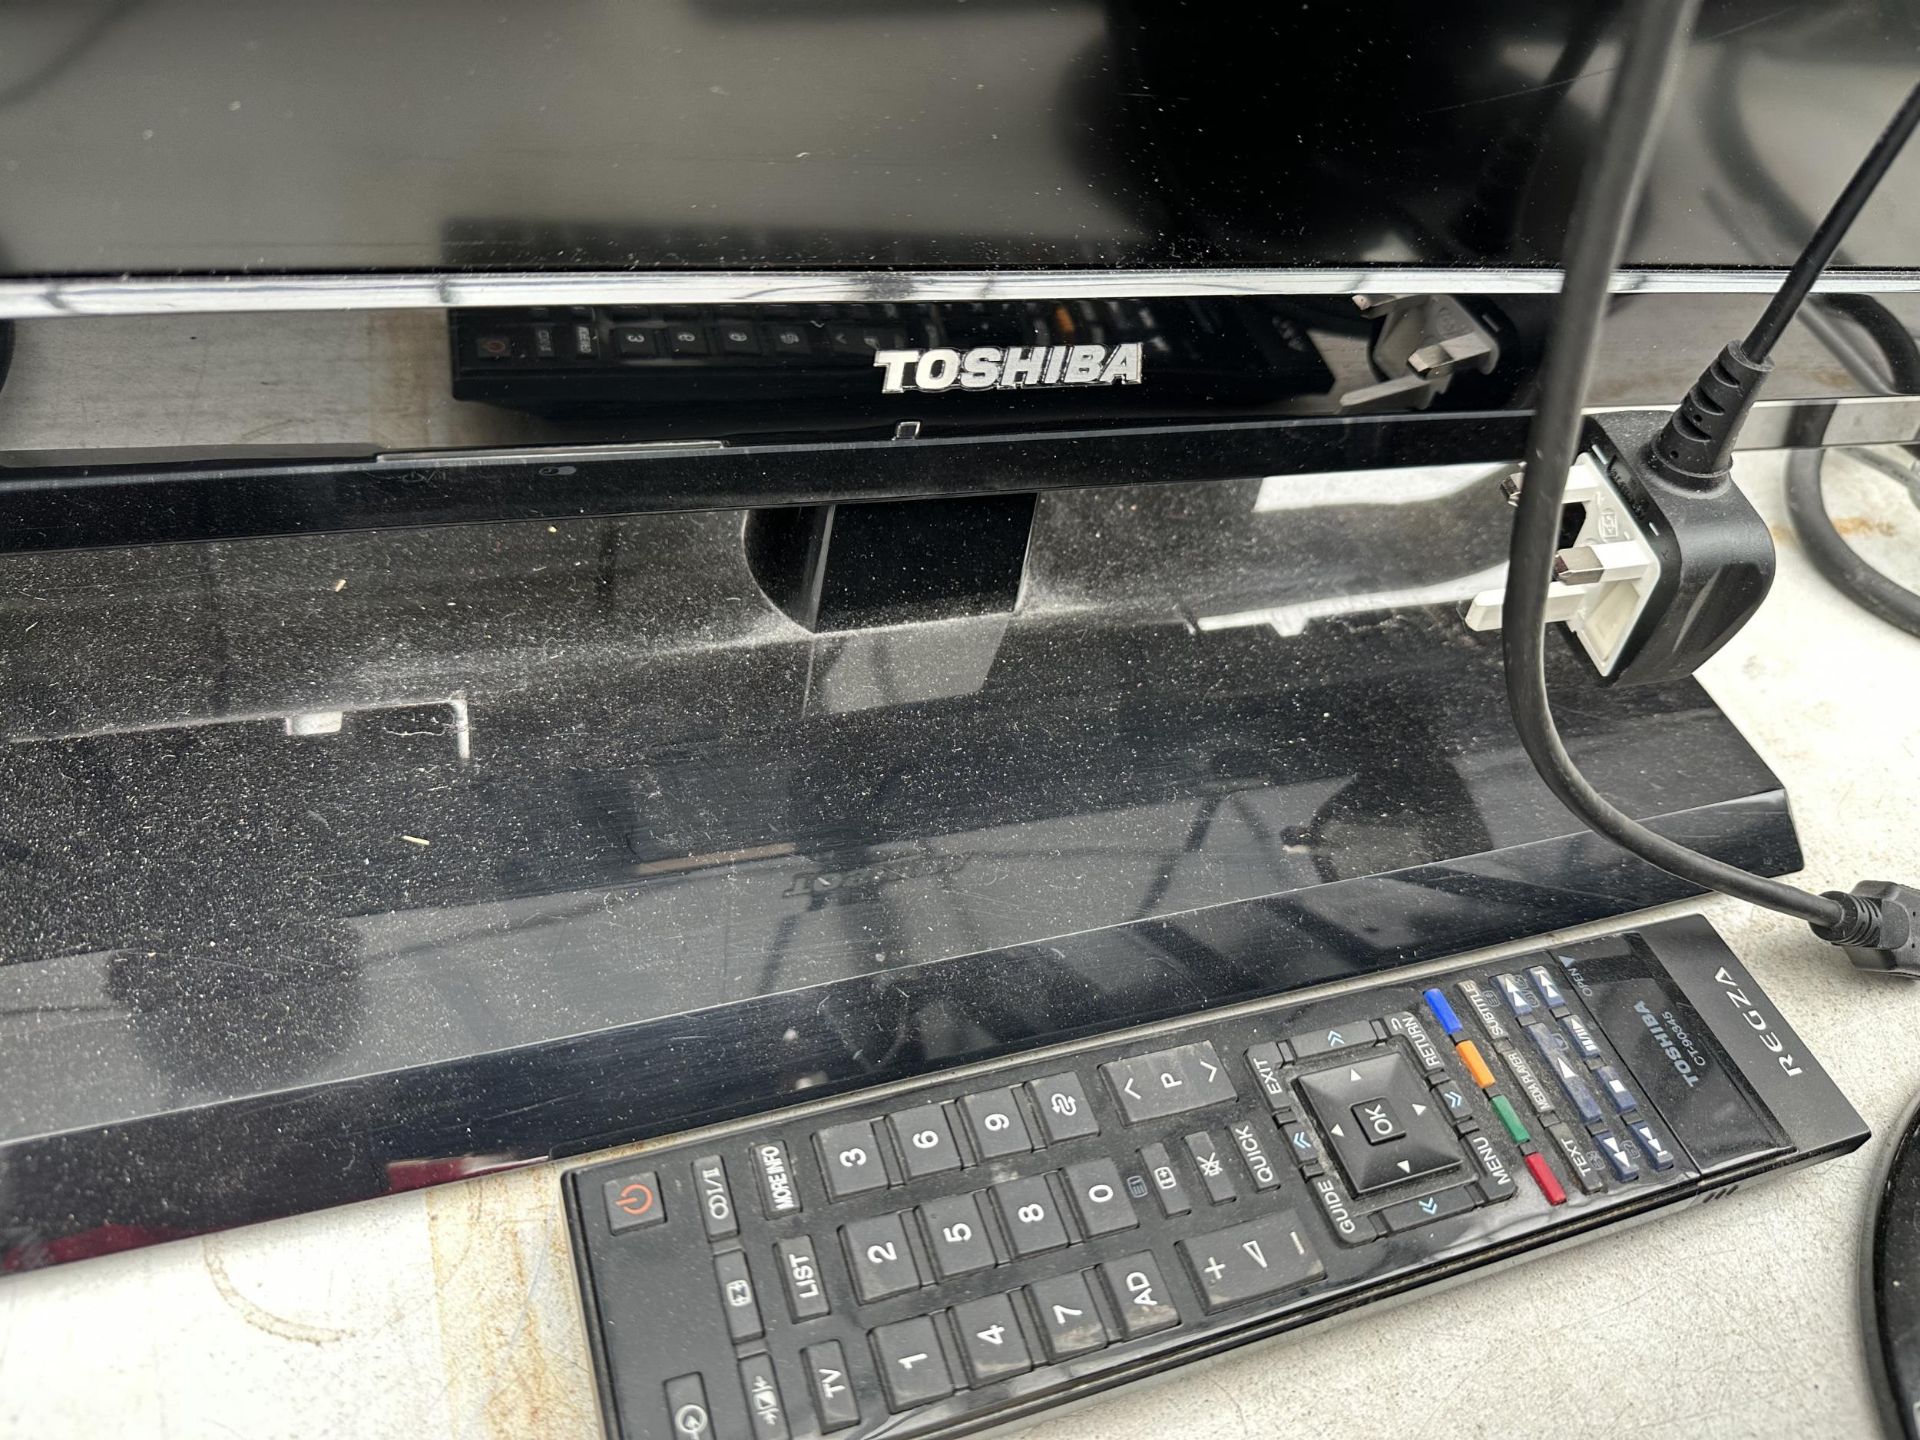 A TOSHIBA 32" TELEVISION WITH REMOTE CONTROL - Image 2 of 3